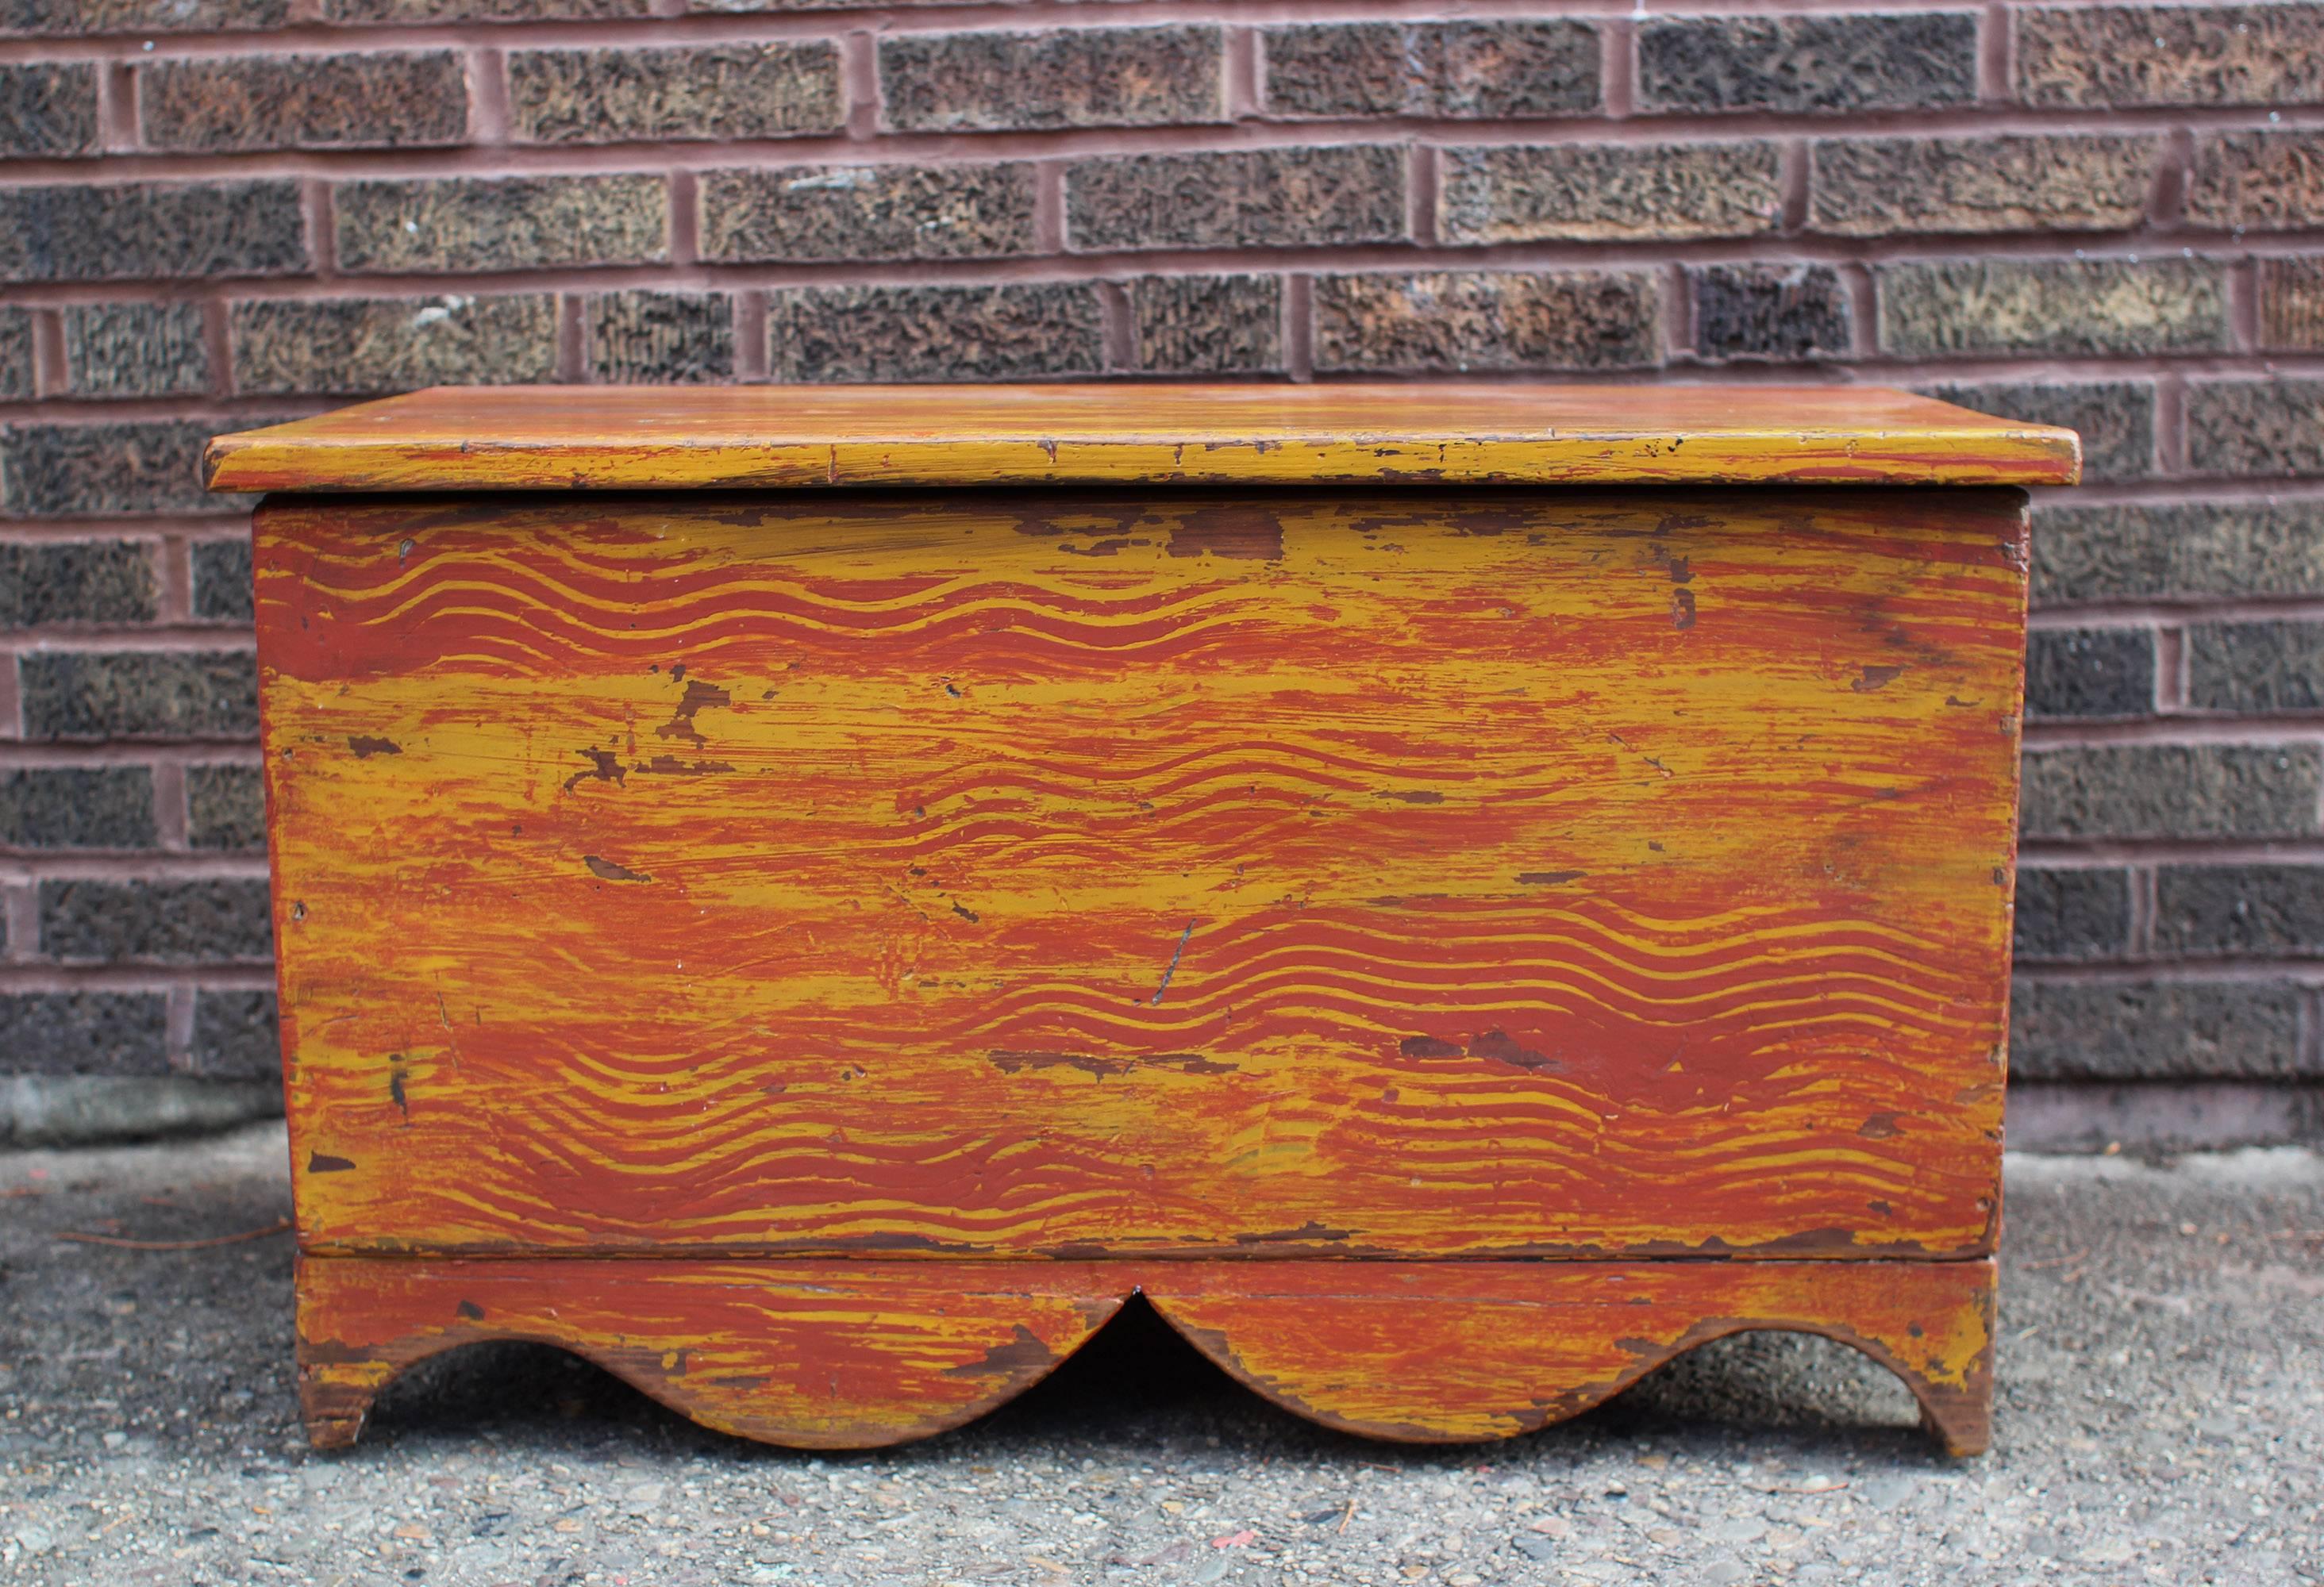 Handsome chest with excellent exaggerated cutout apron and nice lines. Old ochre and red paint decoration on all four sides, over long leaf pine. On the smaller side but very well made and sturdy, this chest is nicely versatile; it would work well